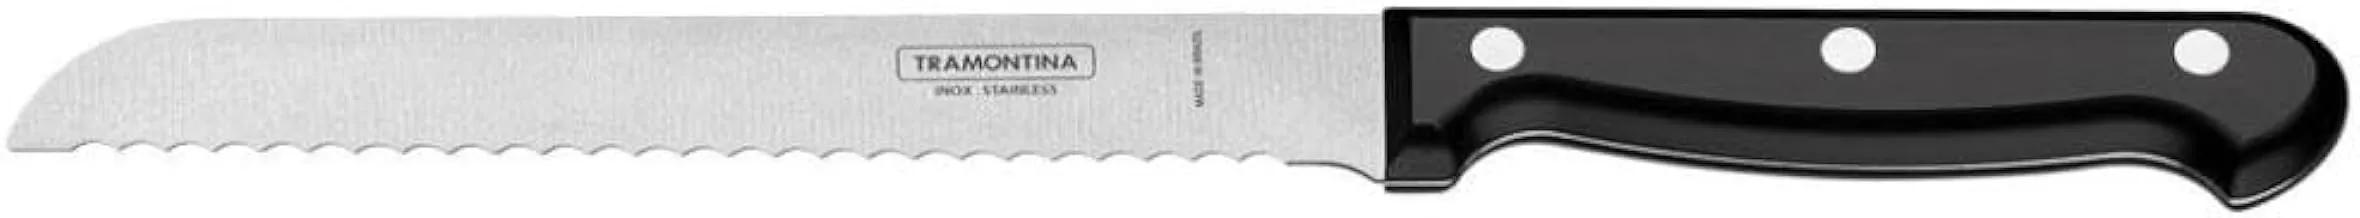 Tramontina - 7 inches bread knife ultracorte - antibacterial handle, 23859/107_black